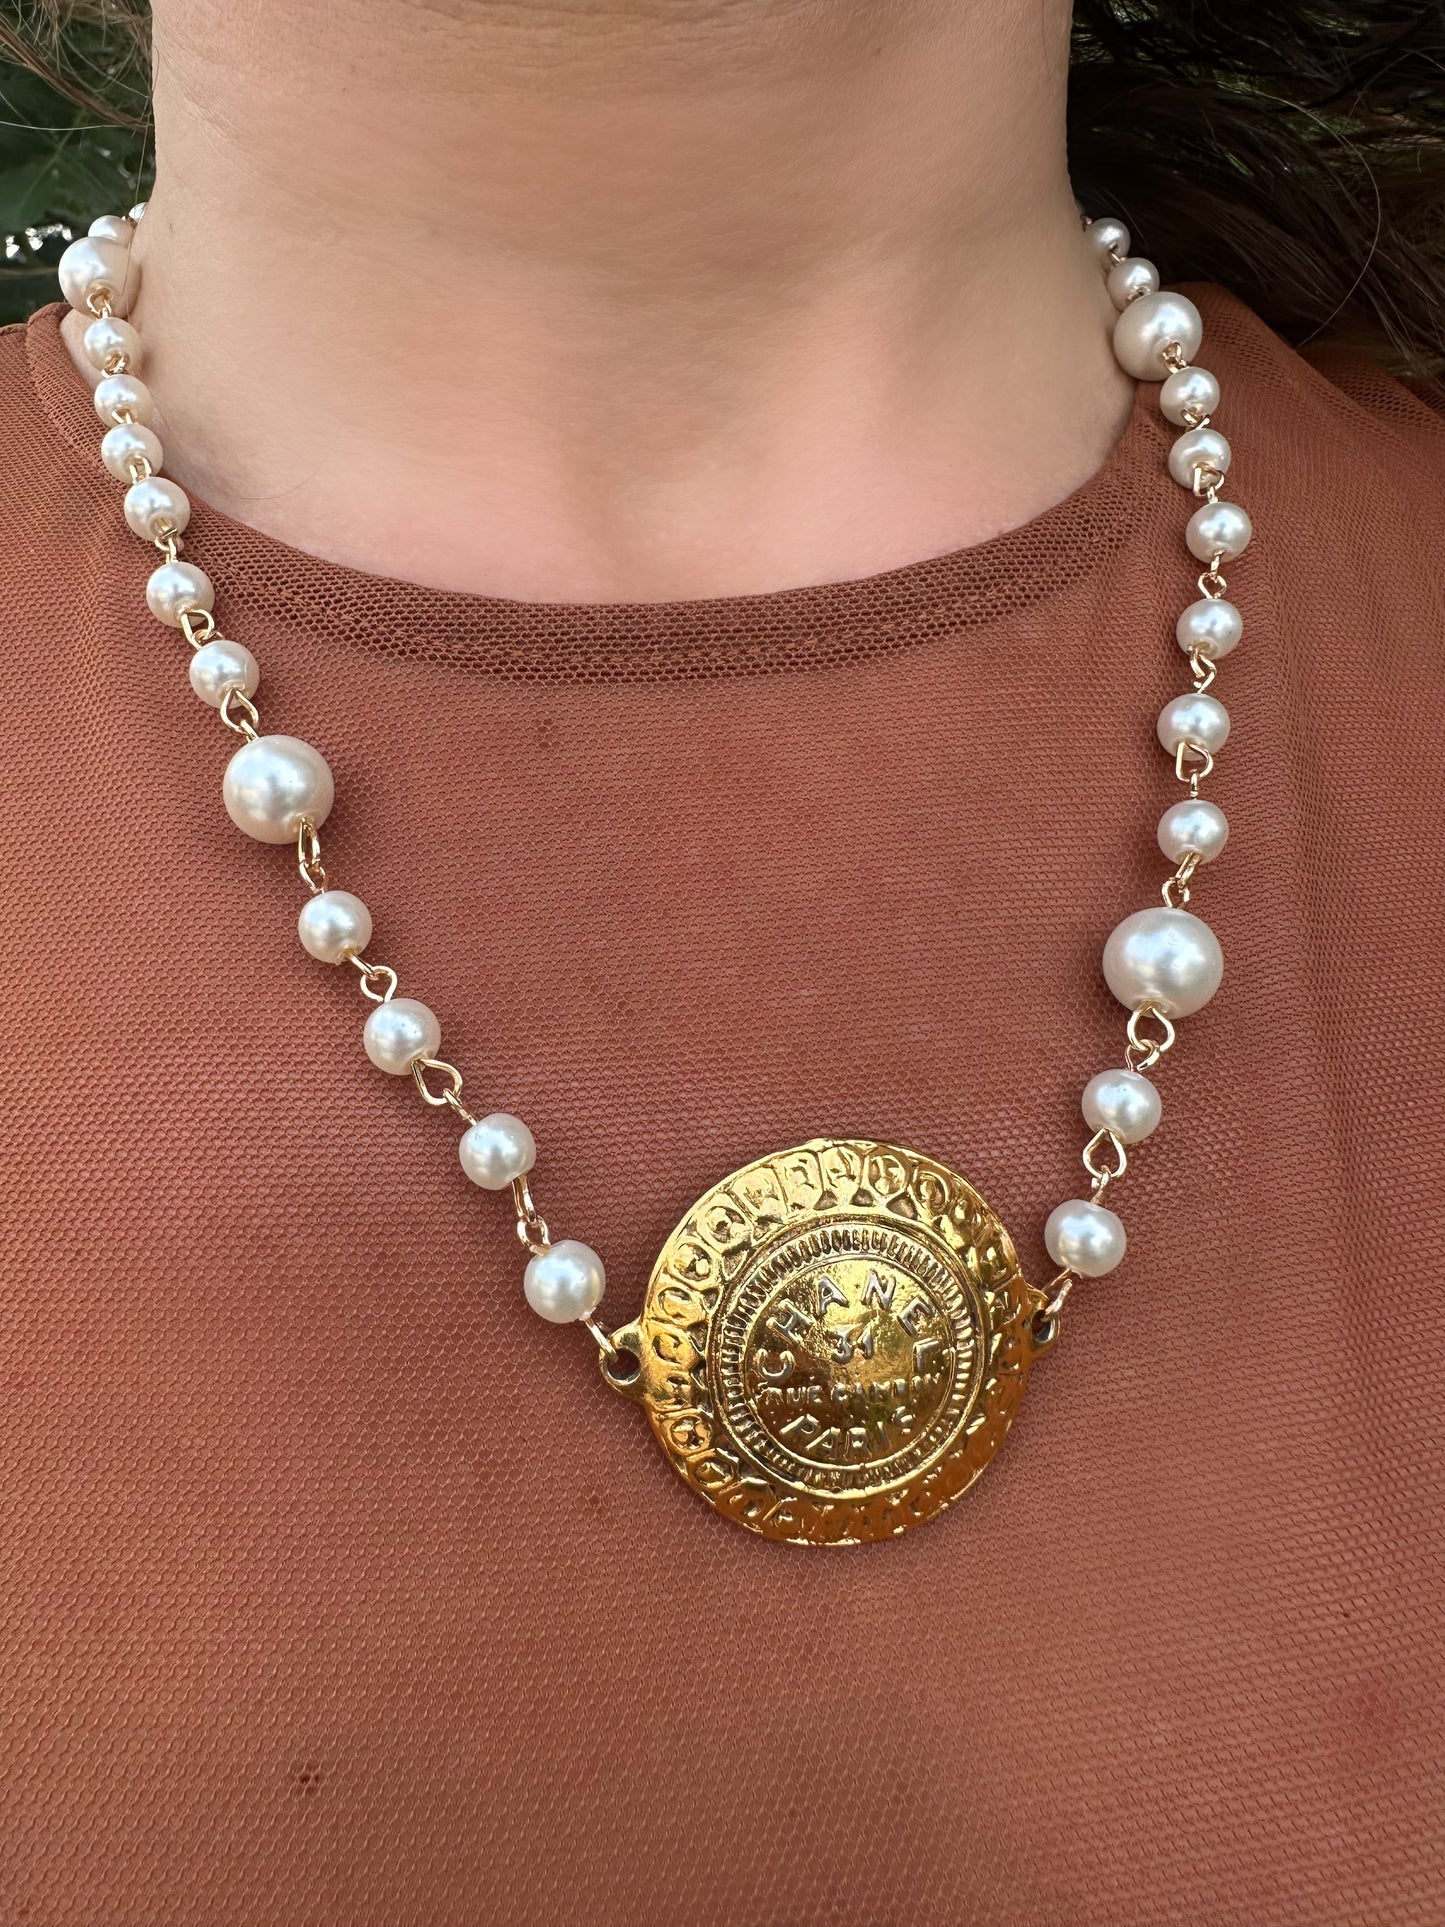 Repurposed CHANEL Coin Charm Pearl Necklace